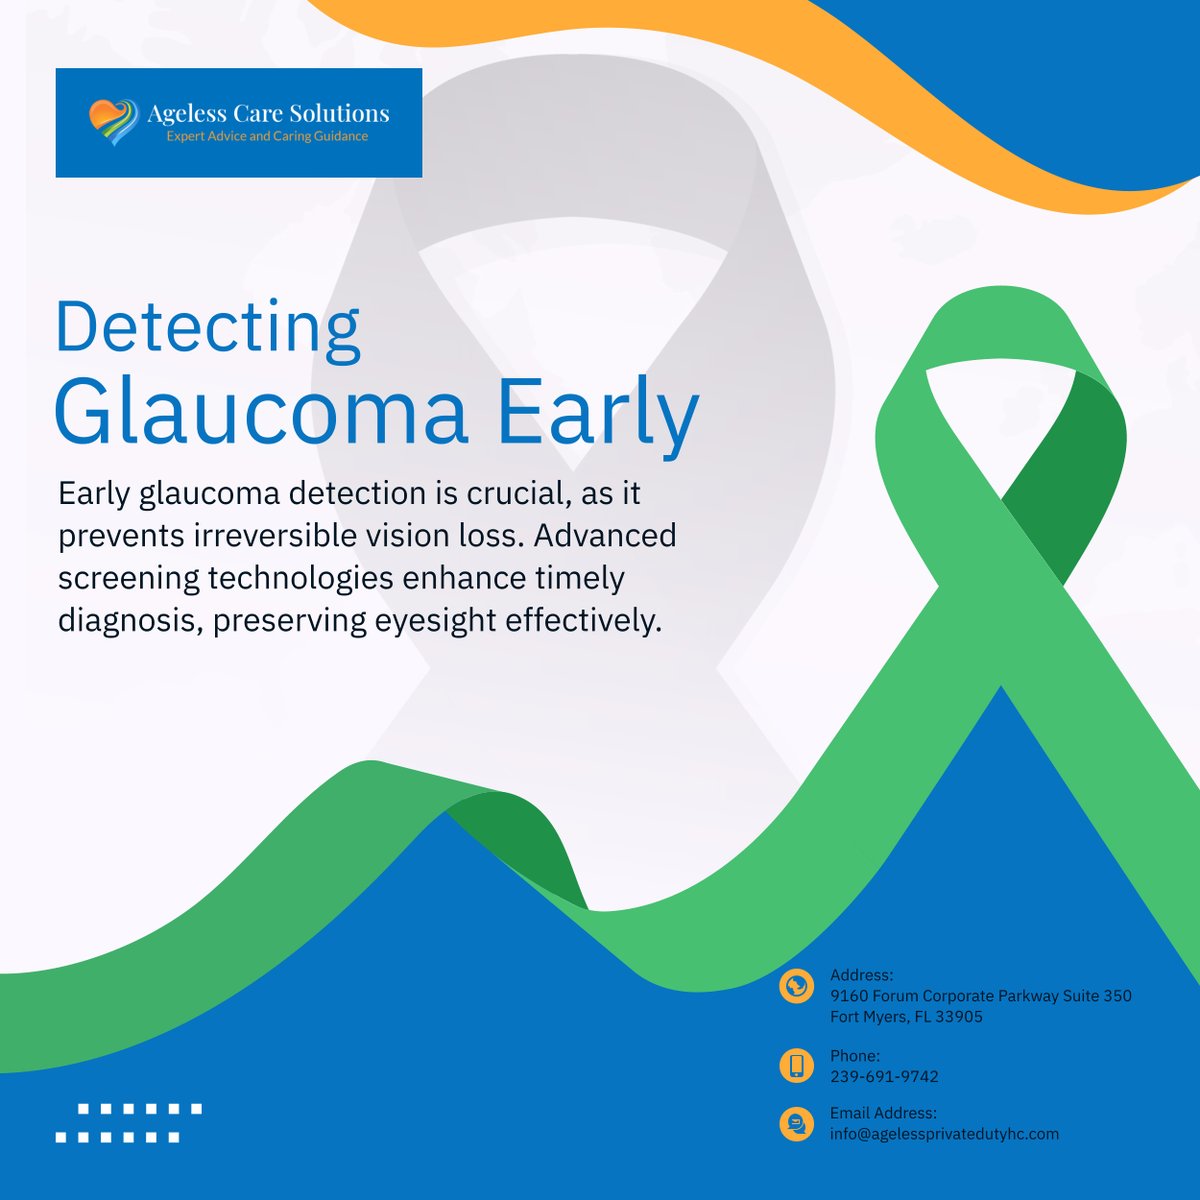 Early detection saves sight! Raise awareness about the importance of regular eye check-ups for detecting glaucoma early and preserving vision. Let's prioritize eye health for a clearer tomorrow. 

#EyeHealthMatters #GlaucomaAwareness #VisionCare #HealthyEyes #AgelessCareSolutions